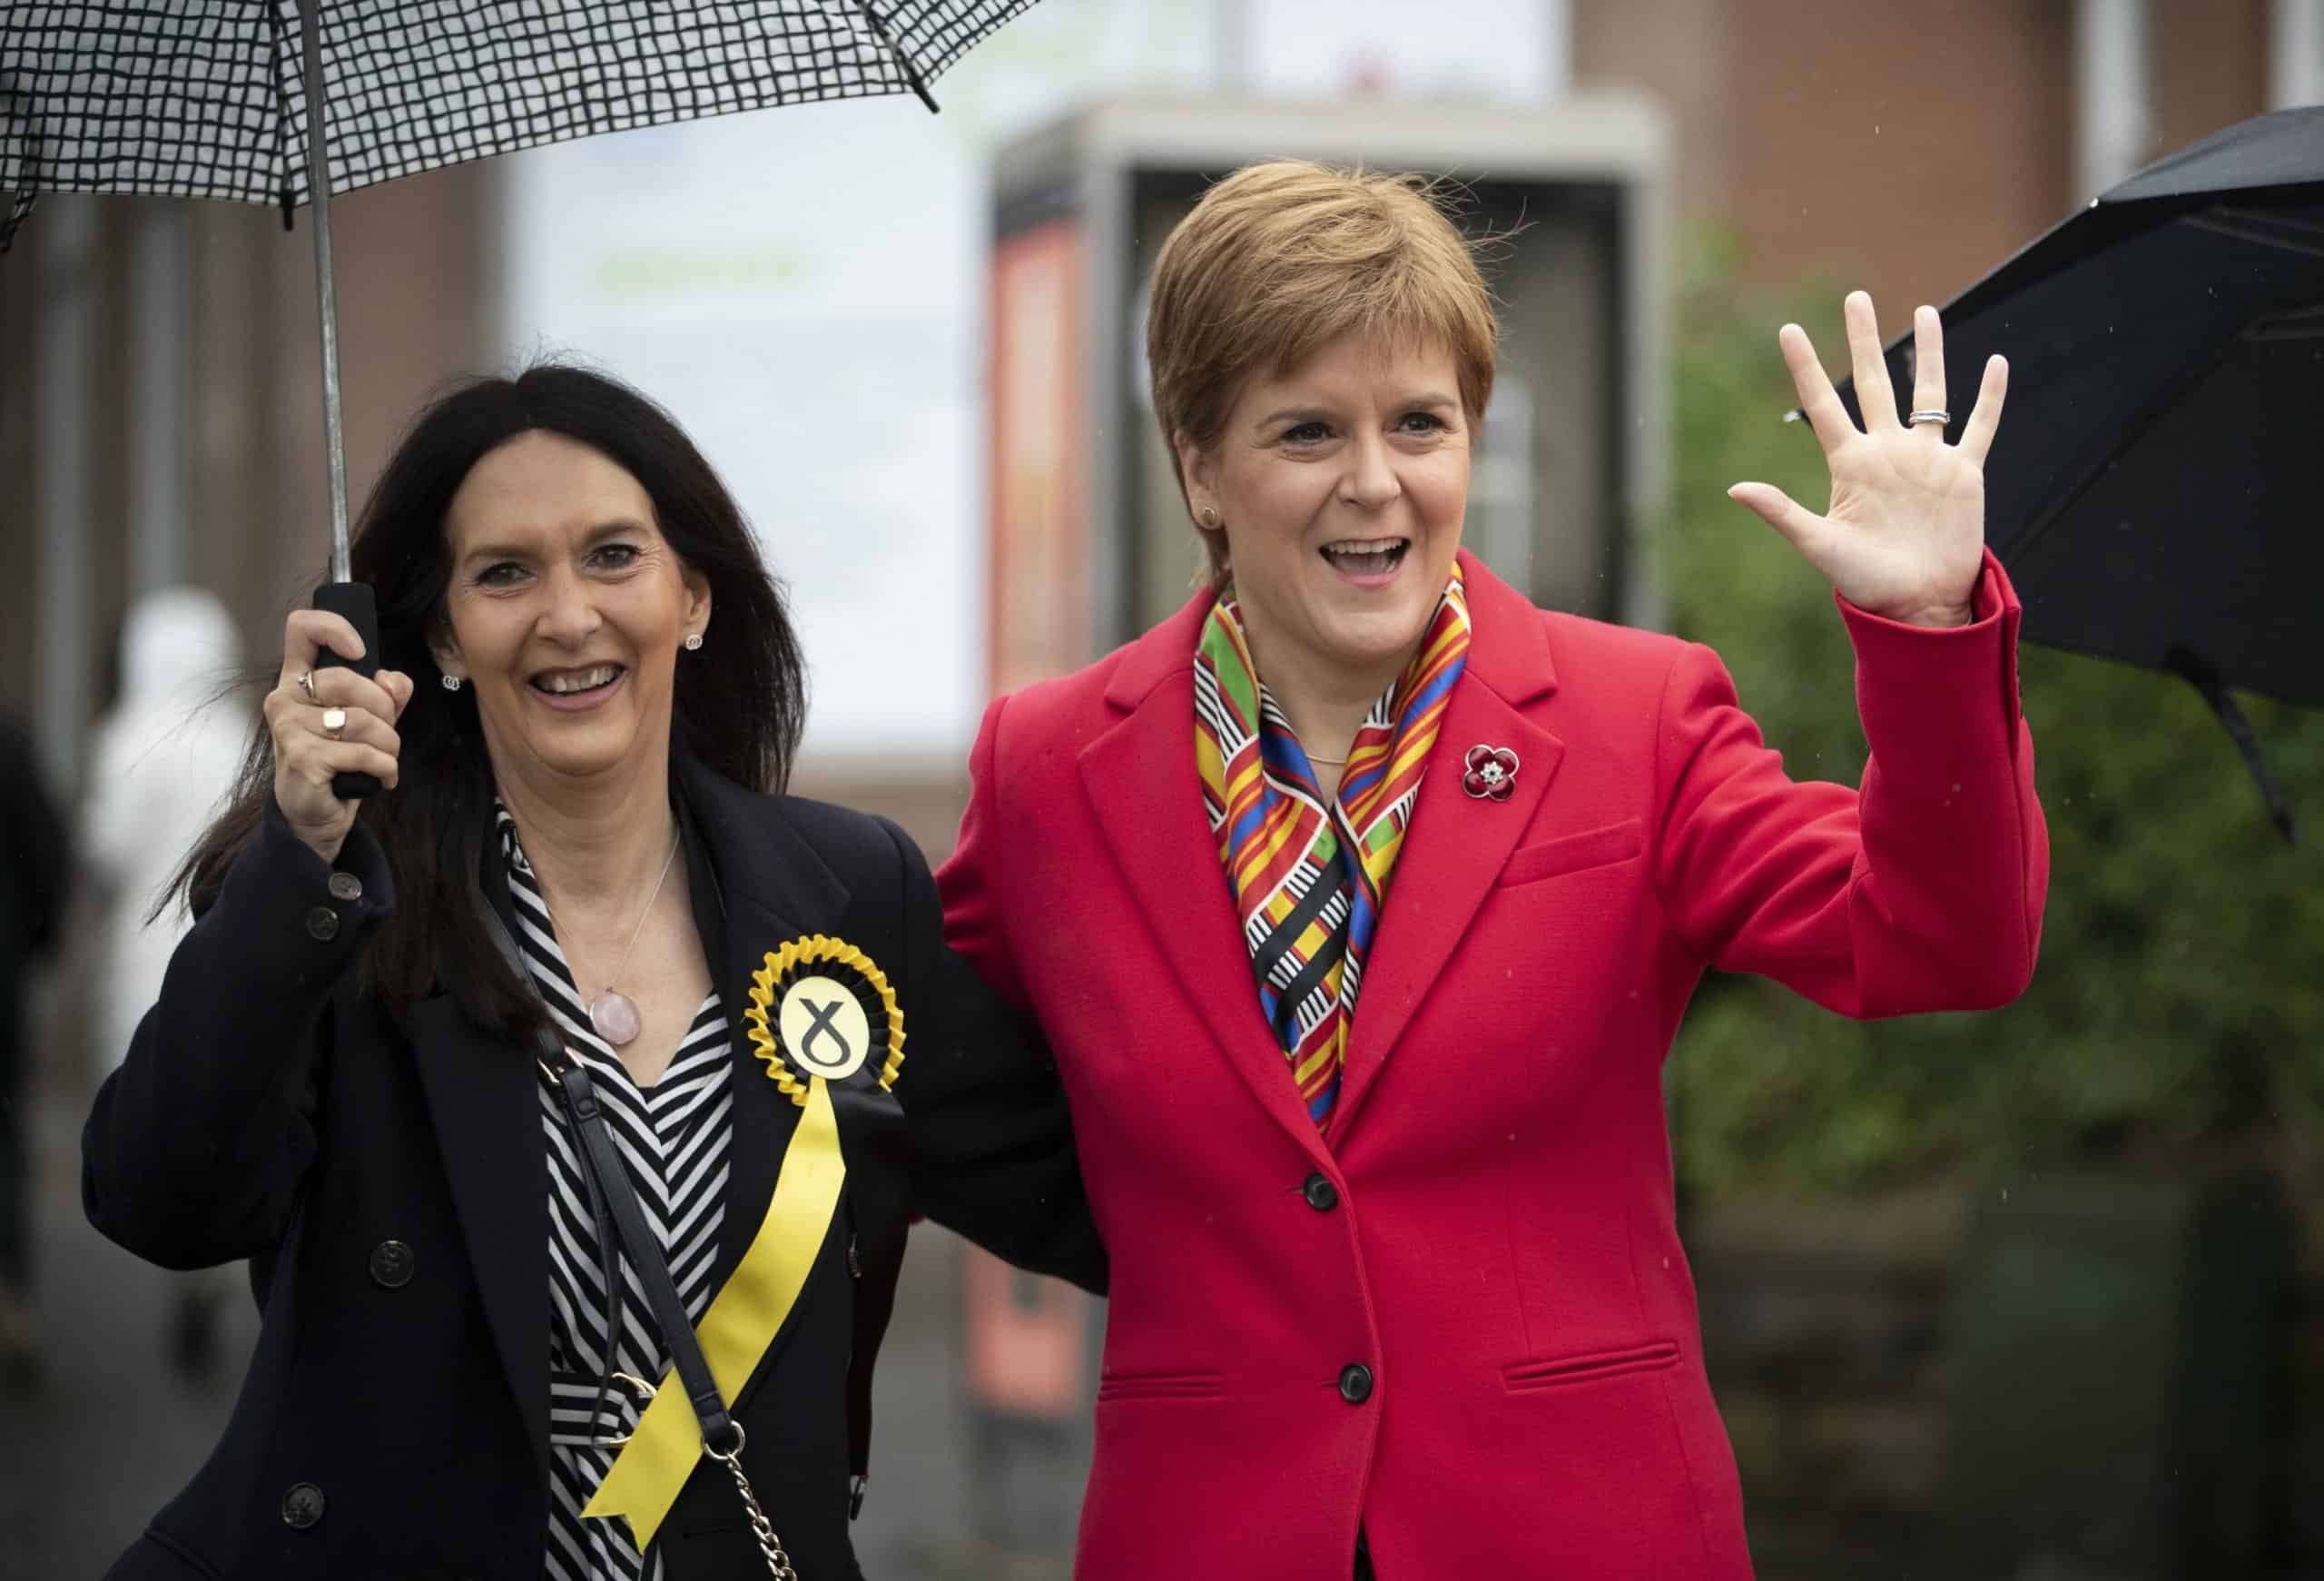 SNP’s Ferrier gave a church reading – after developing Covid symptoms